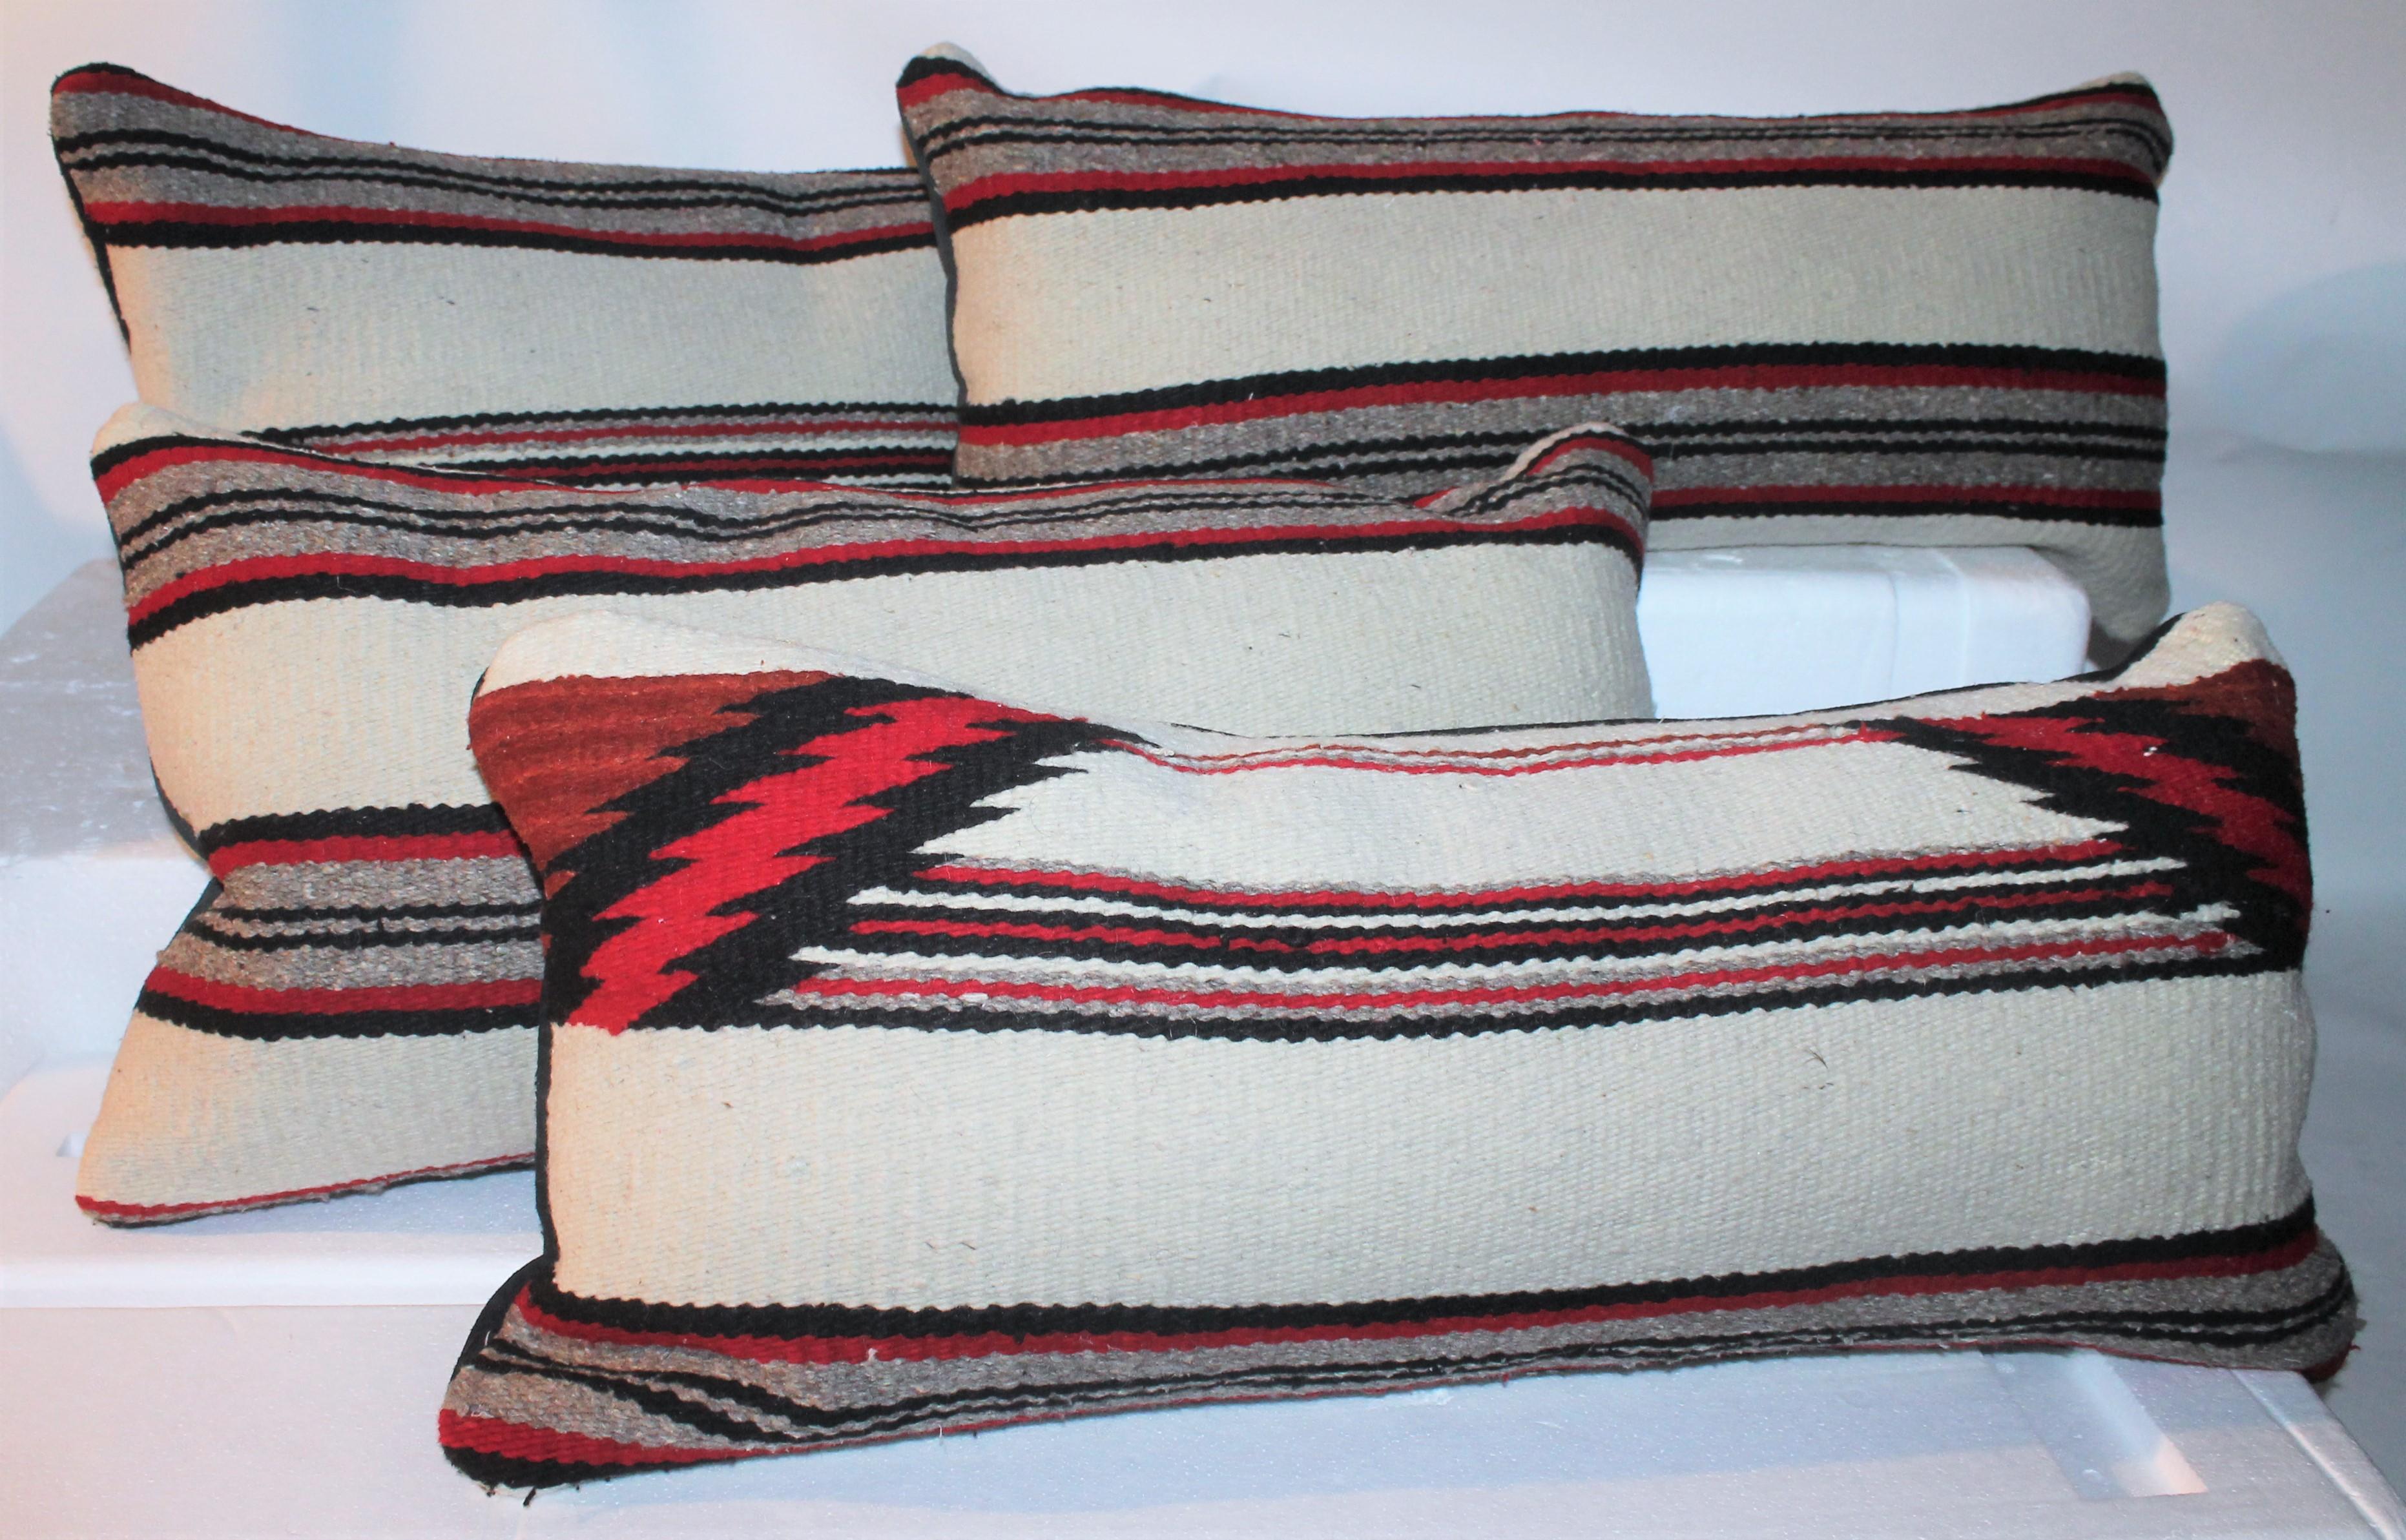 These fine saddle blanket Indian weaving bolster pillows have black suede / leather backings. The condition are very fine. Sold in pairs.